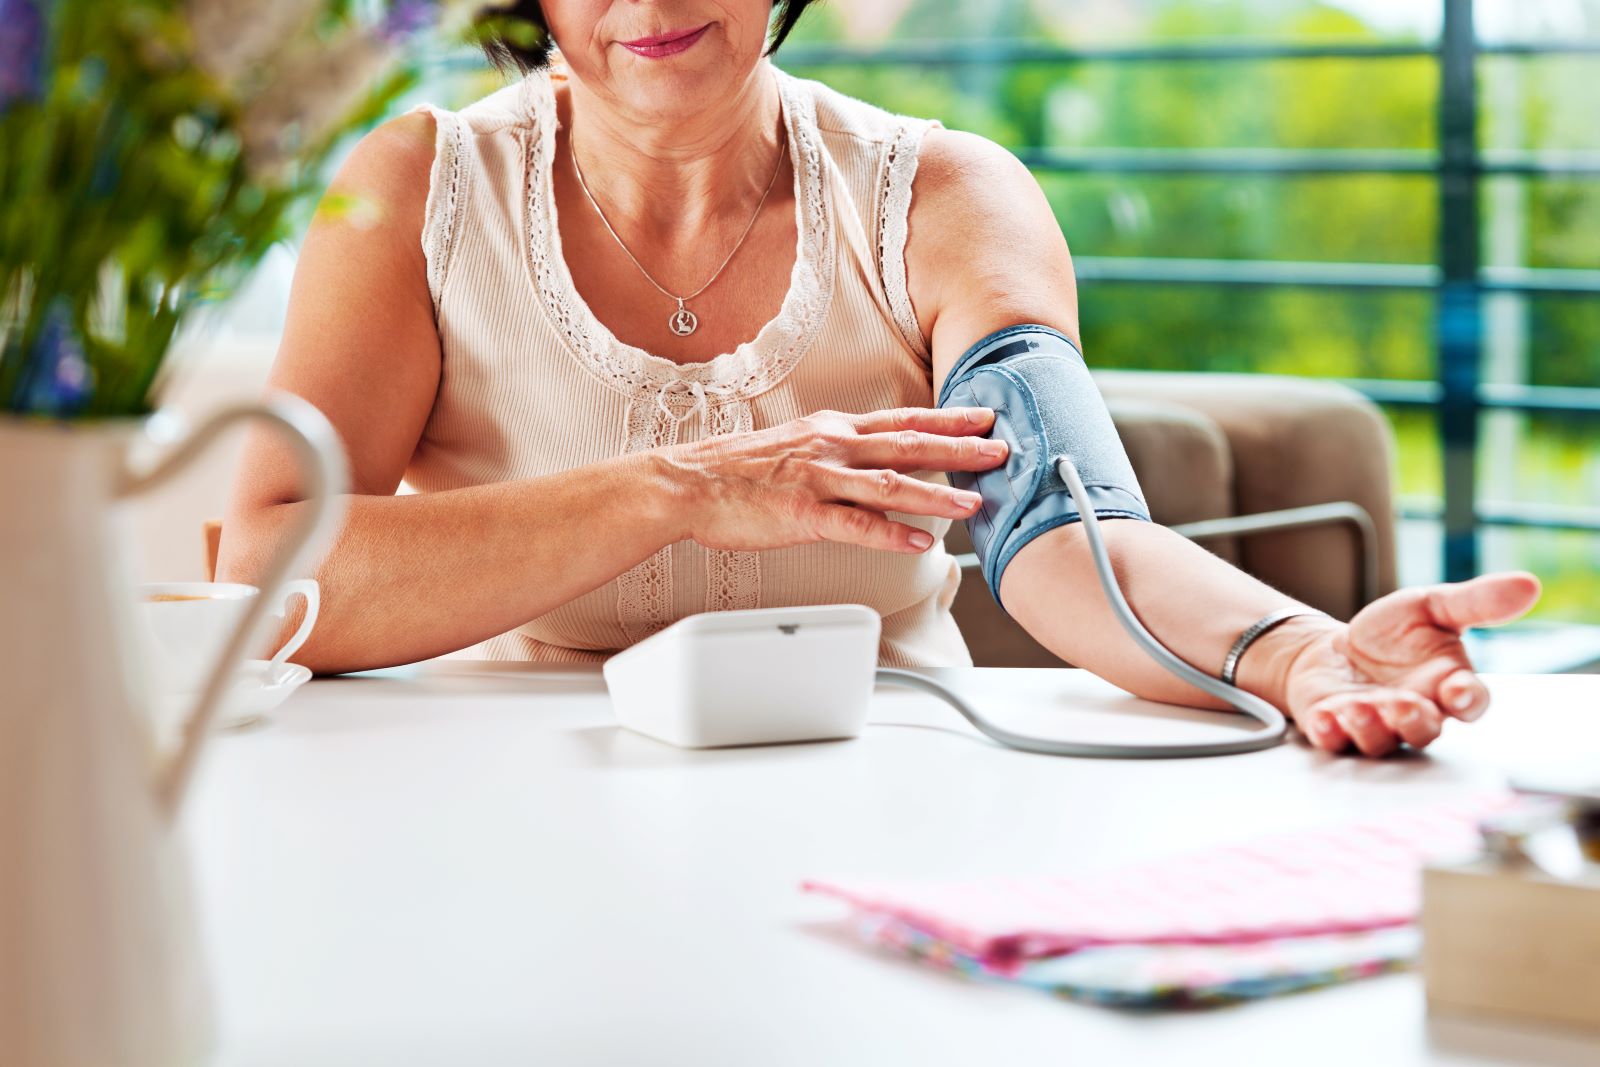 Importance of Home Blood Pressure Monitoring